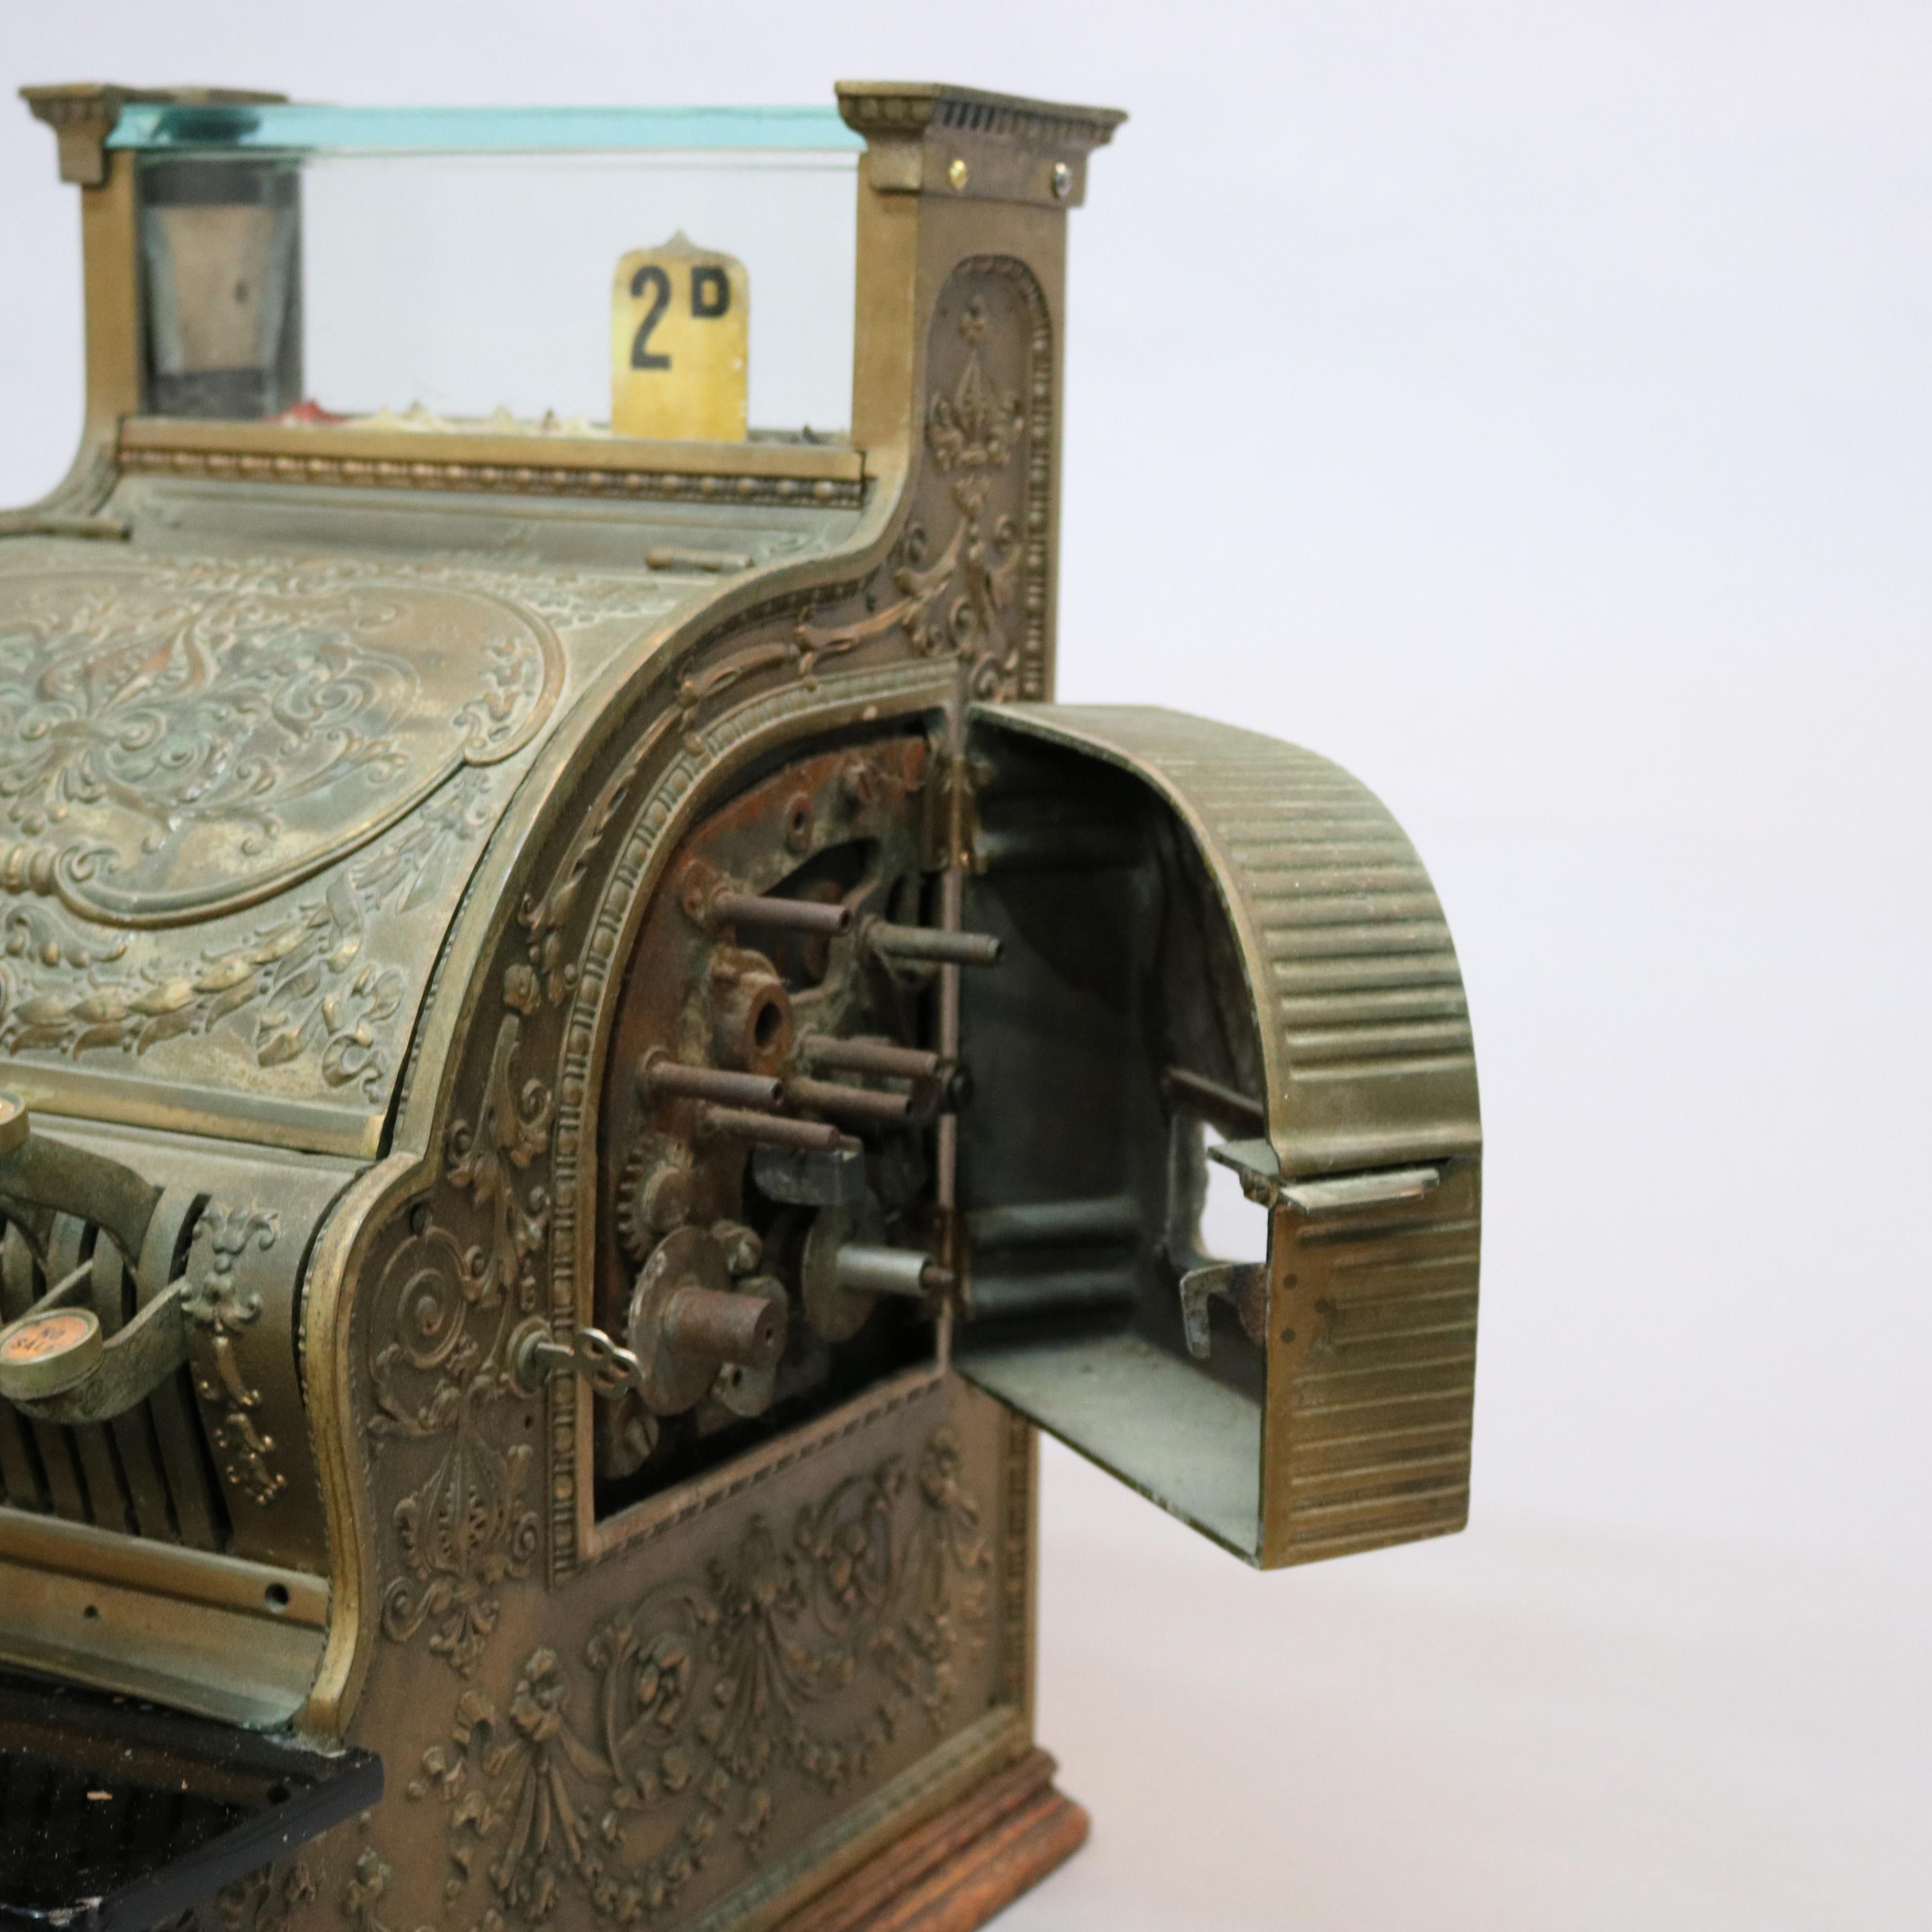 20th Century Antique National Candy Store Brass Cash Register, circa 1900